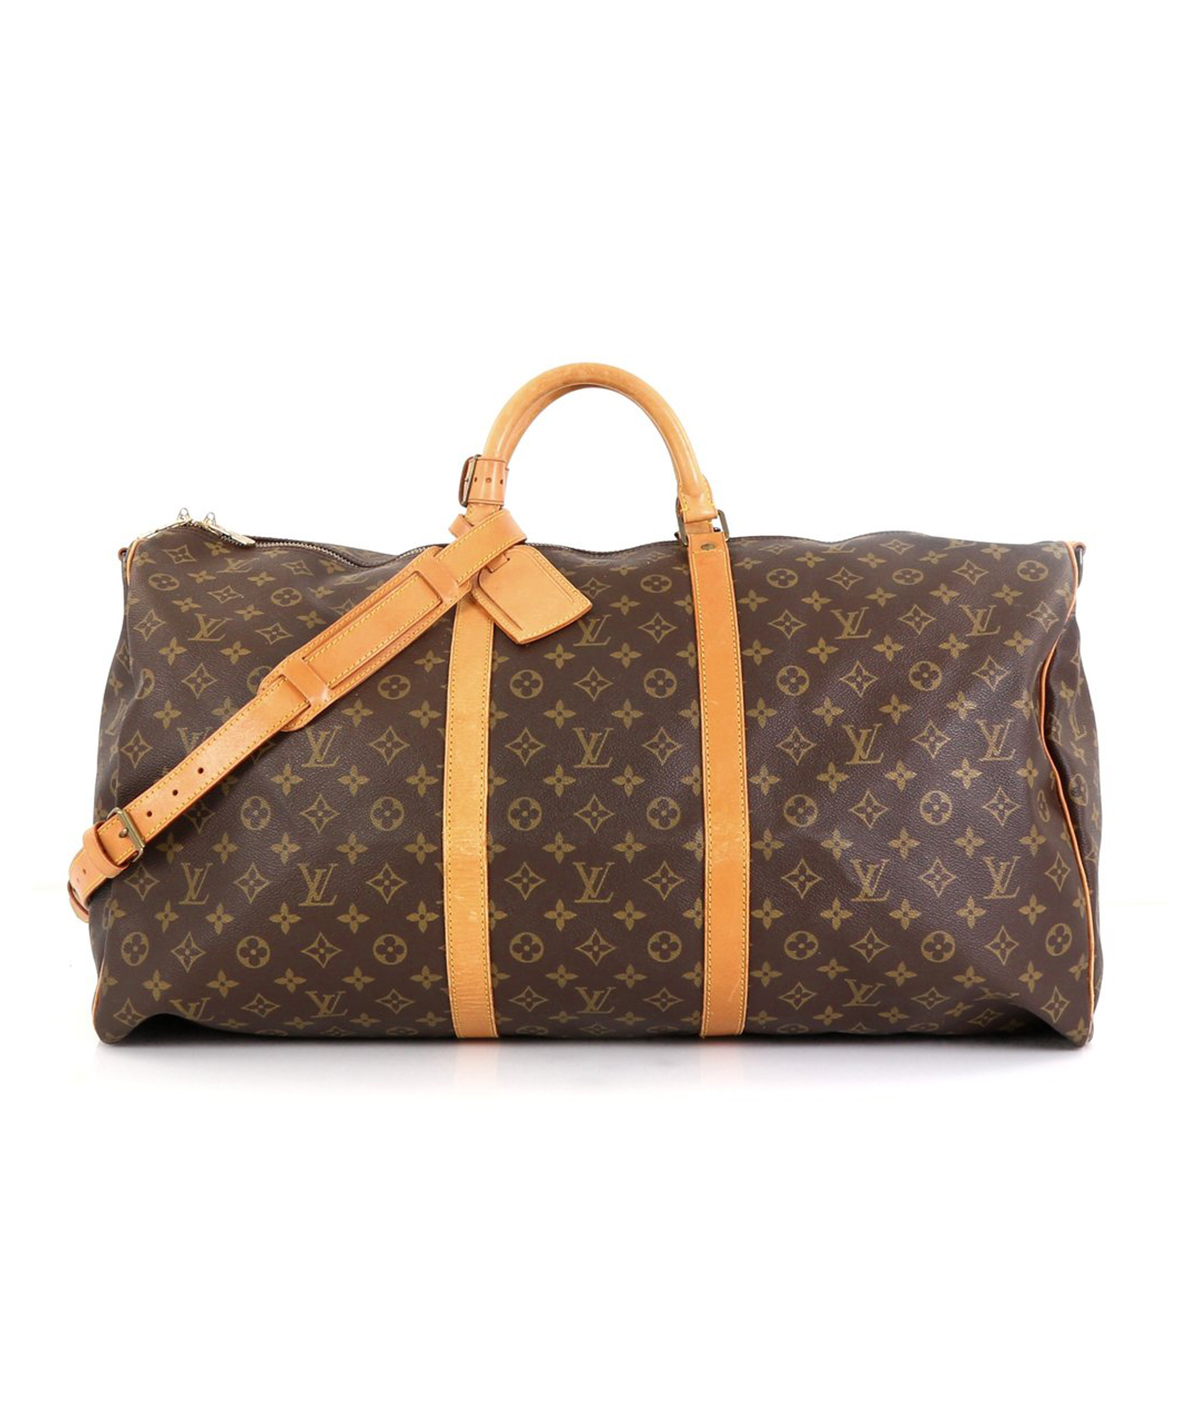 Pop Quiz: Which Louis Vuitton Bag Are You?